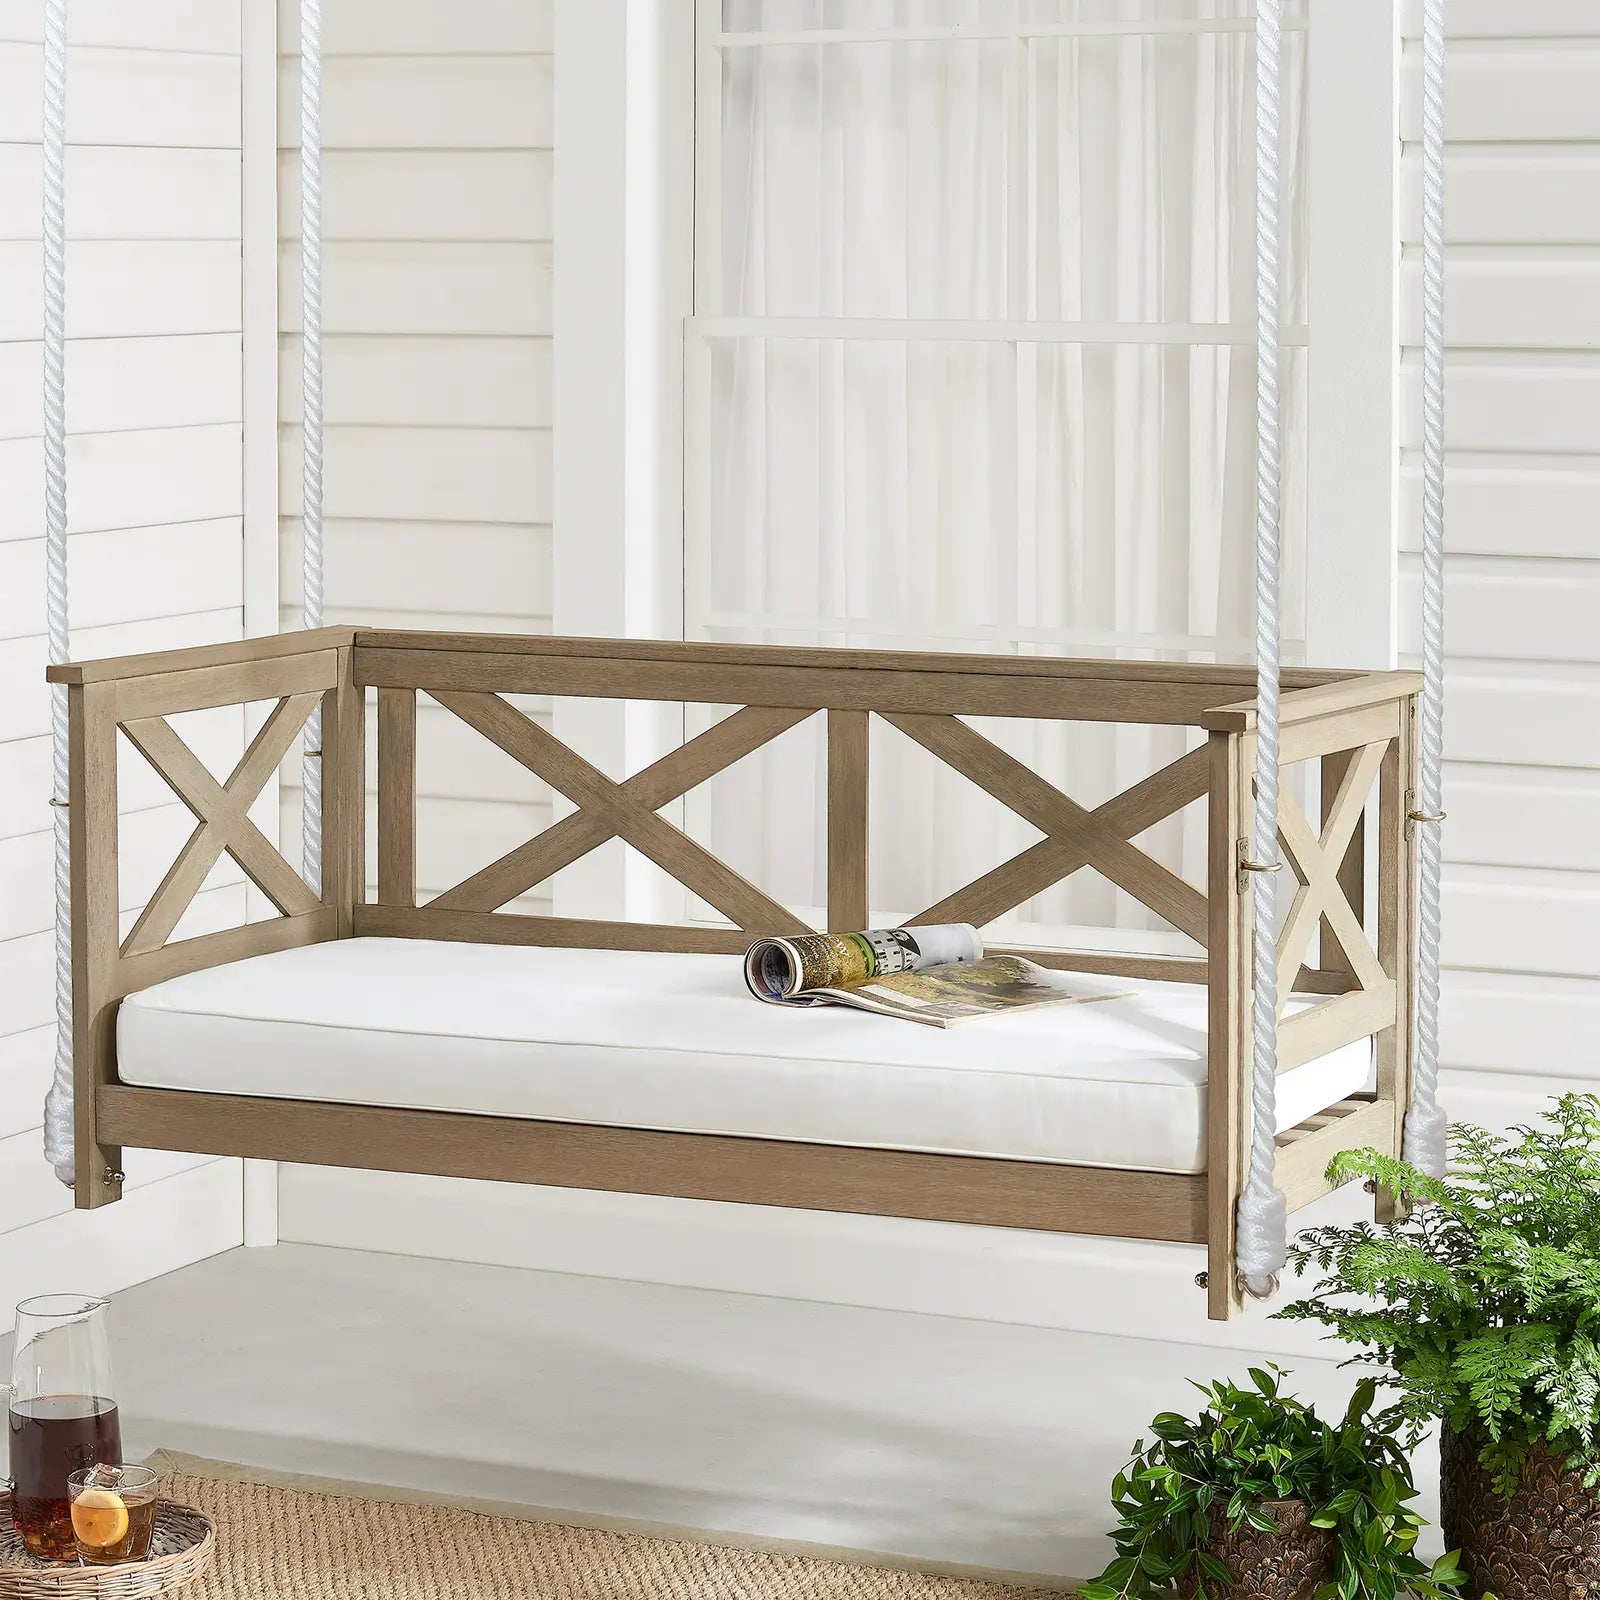 Experience Outdoor Comfort with the 2-Person Cushioned Bench Porch Swing | Rustic Design | Weathered Grey Finish | Cozy Seat Cushion